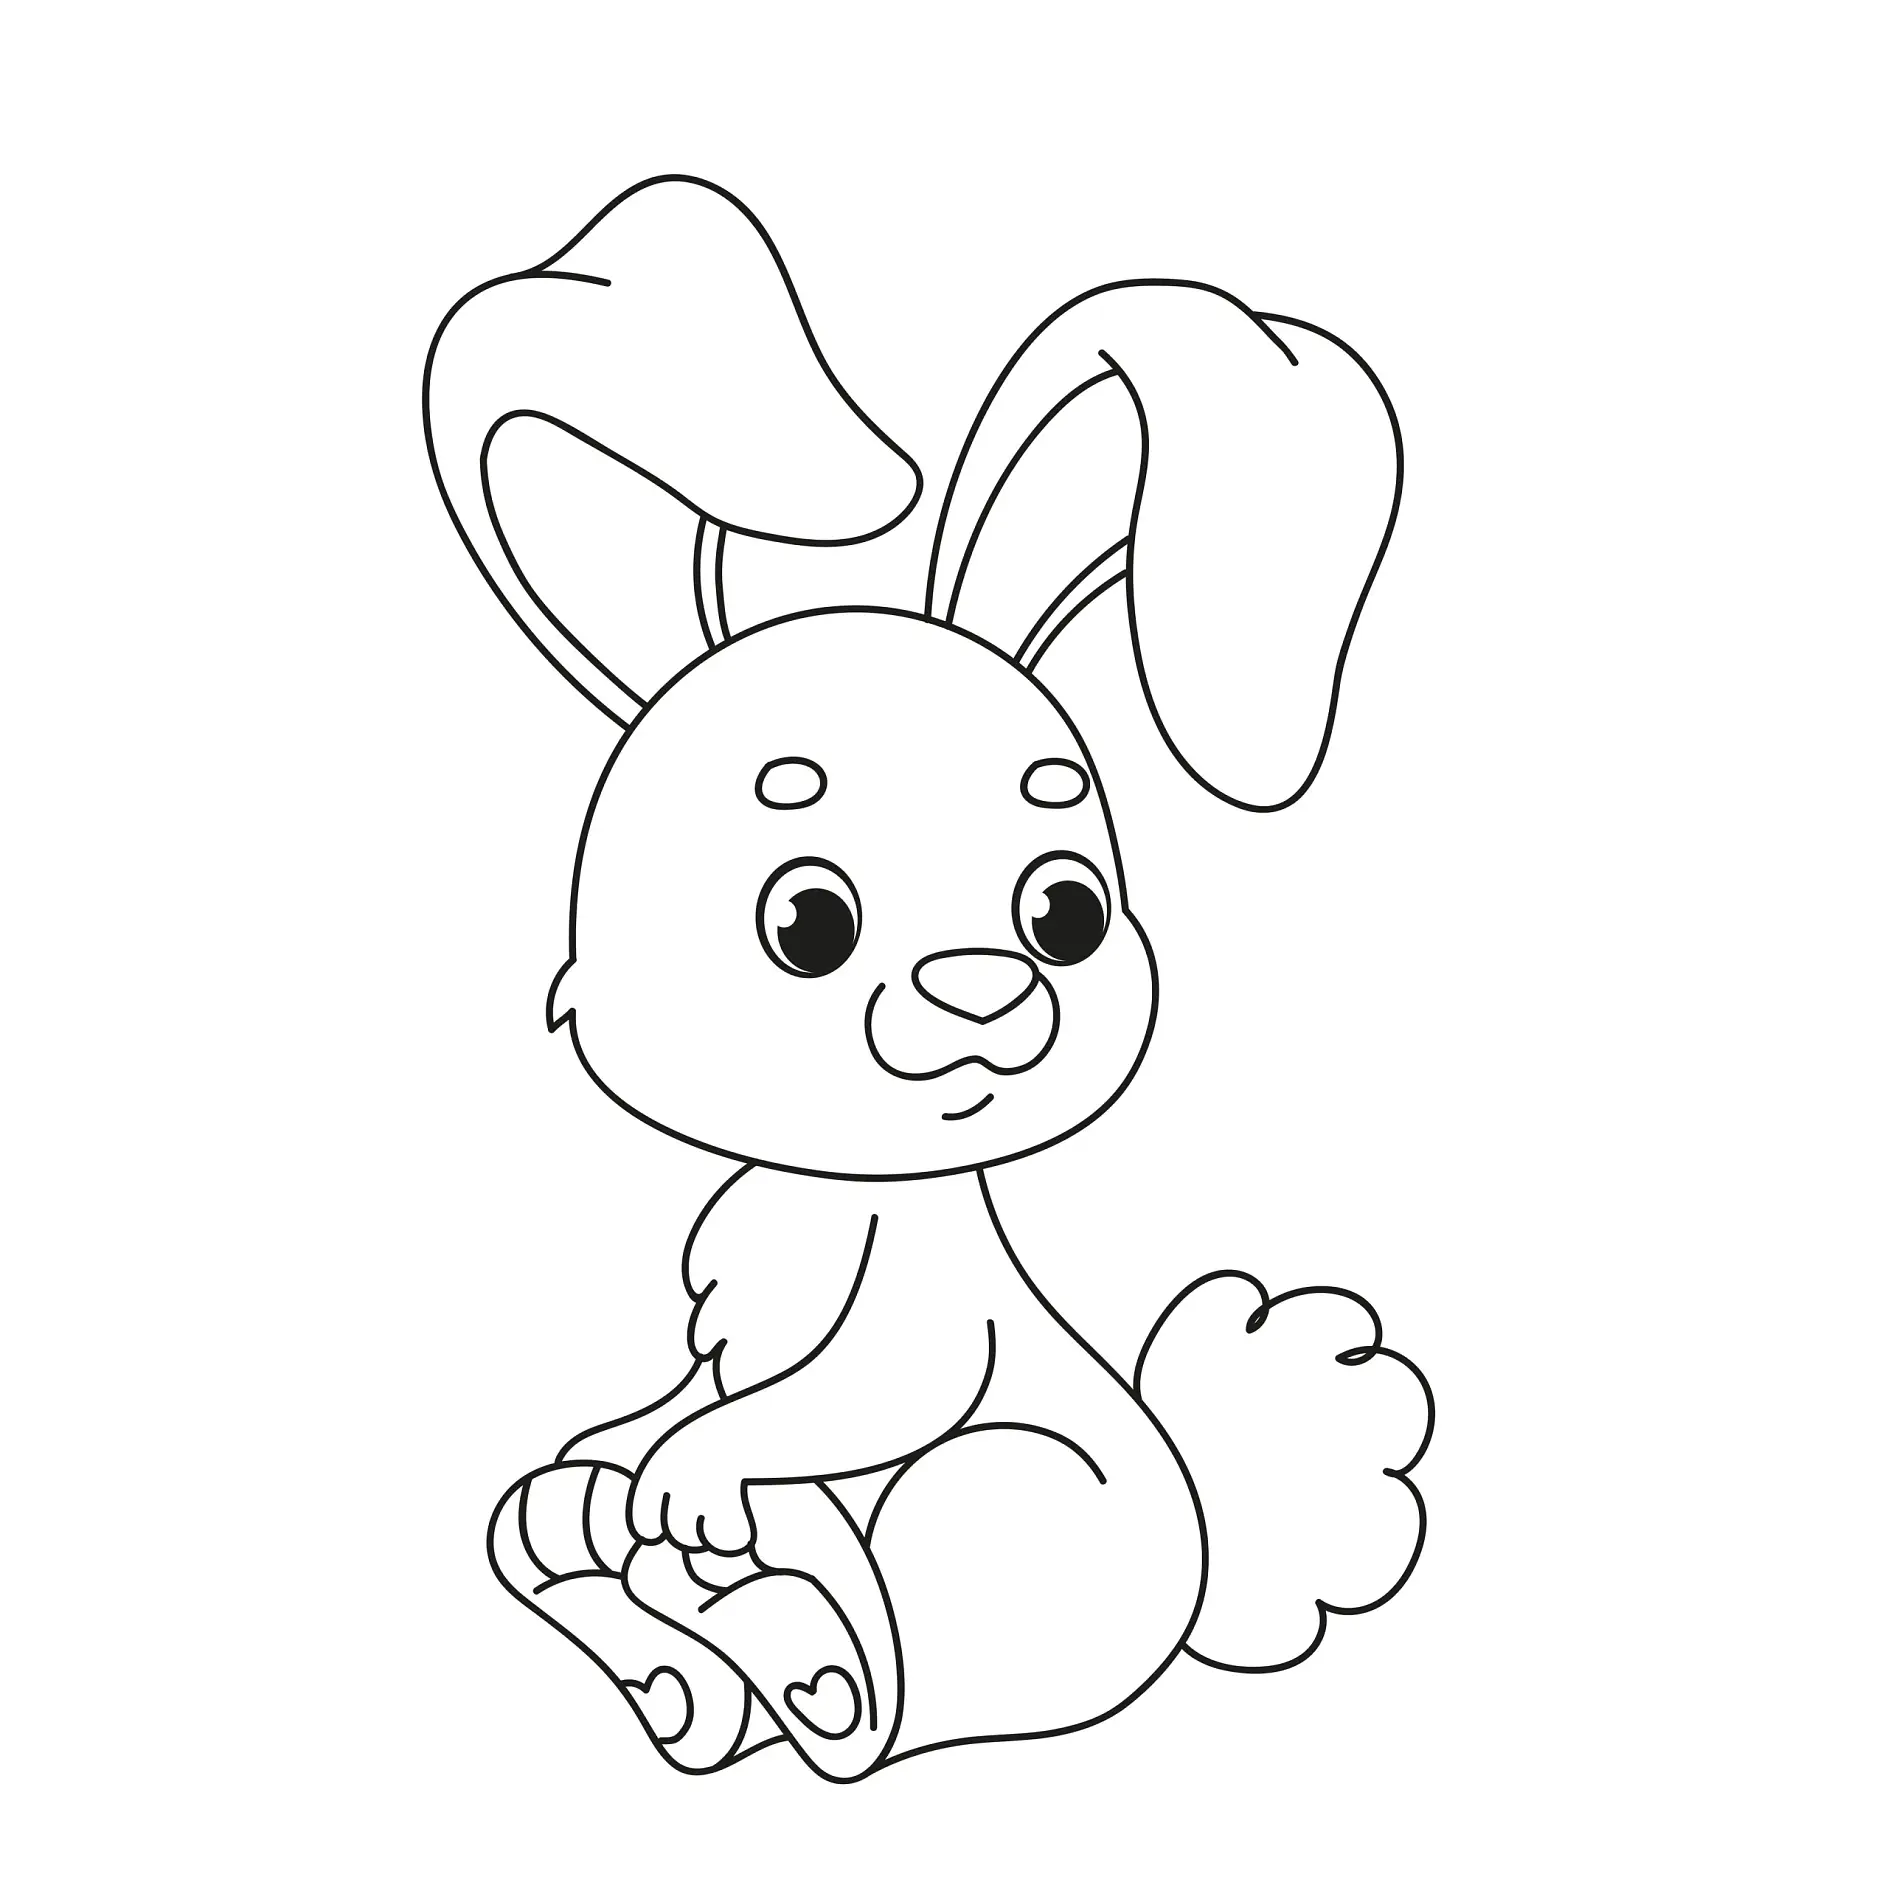 Ausmalbild niedlicher sitzender HaseA cute rabbit is sitting. Children s cartoon coloring book. Black and white vector illustration with Easter bunny. Developing task for the kid